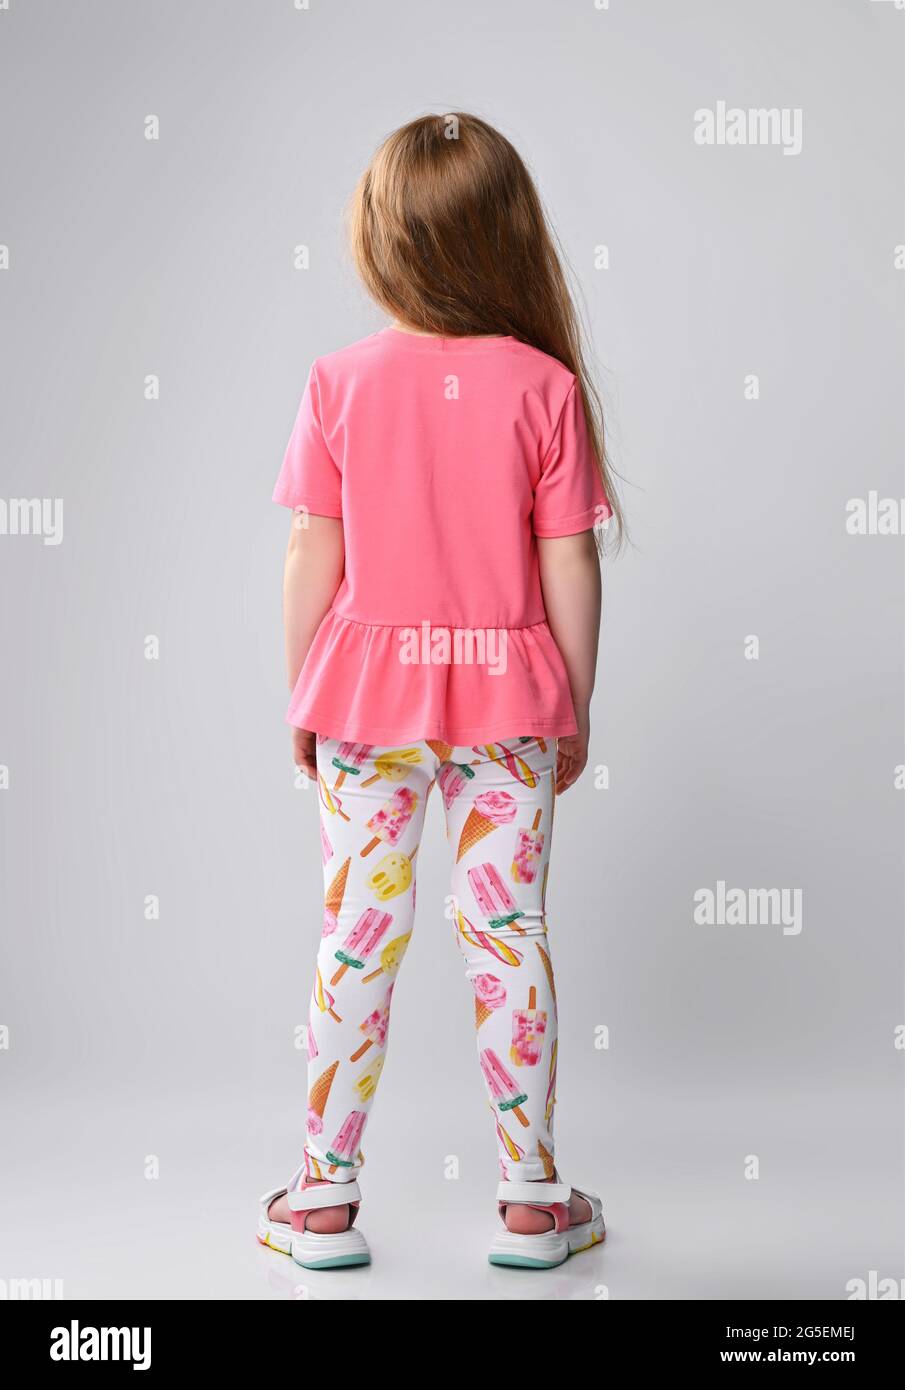 Red-haired kid girl in pink t-shirt, colorful pants and sandals stands still with her back to camera Stock Photo